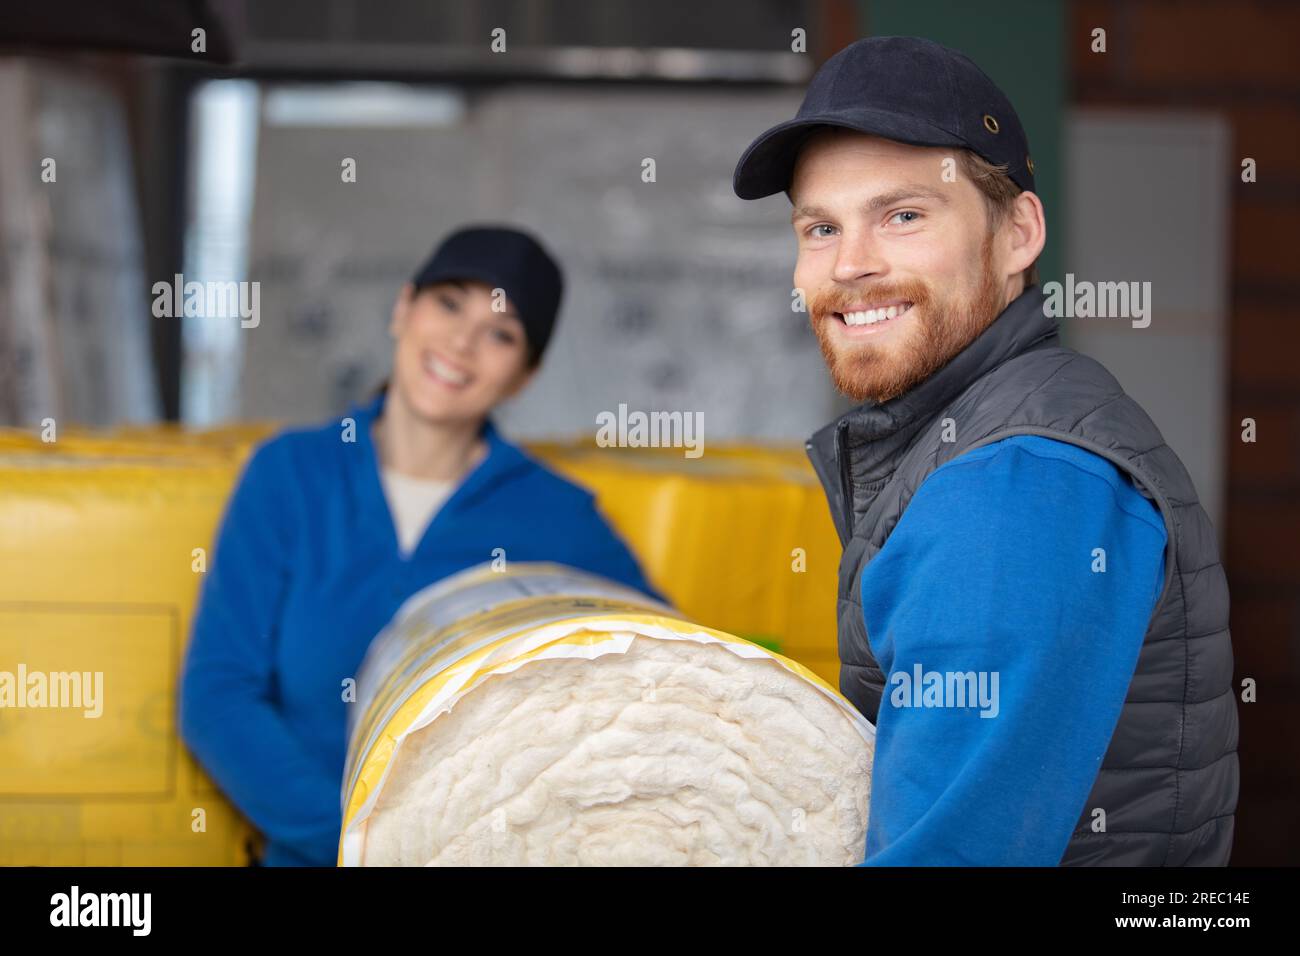 two workers carry roll of insulation Stock Photo